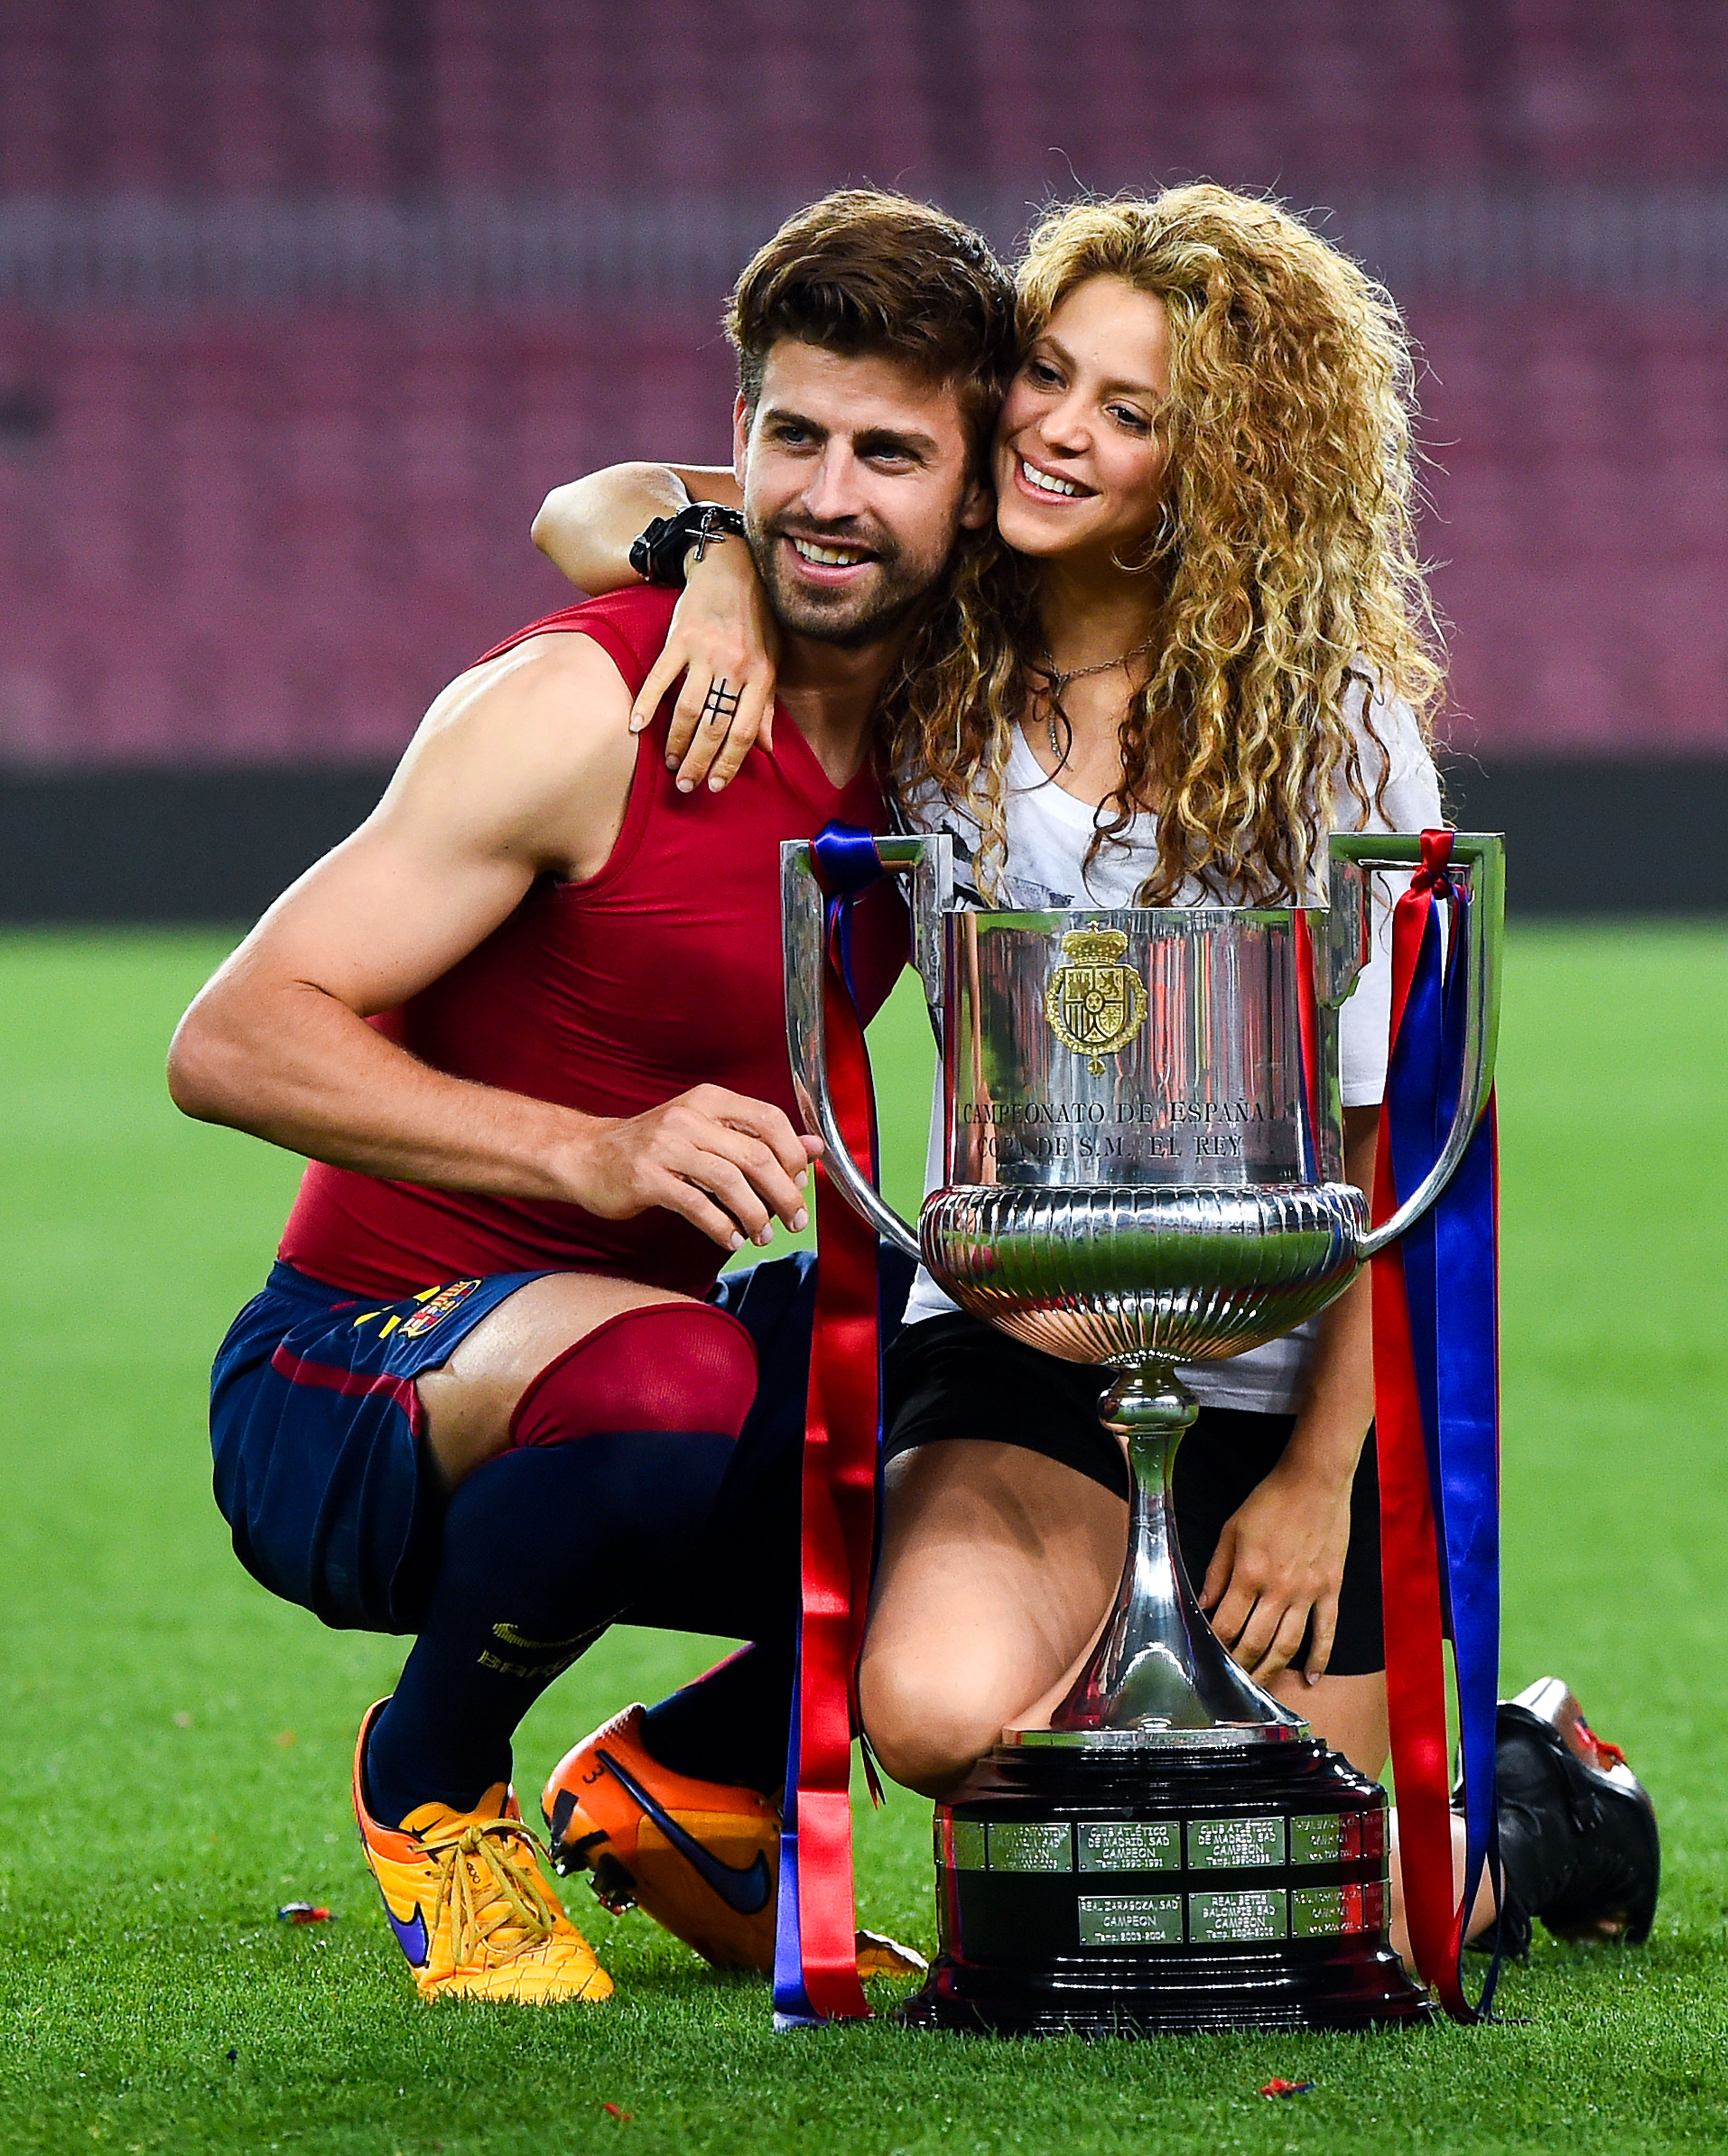 Gerard Pique of FC Barcelona and Shakira on May 30, 2015 in Barcelona, Spain. | Source: Getty Images